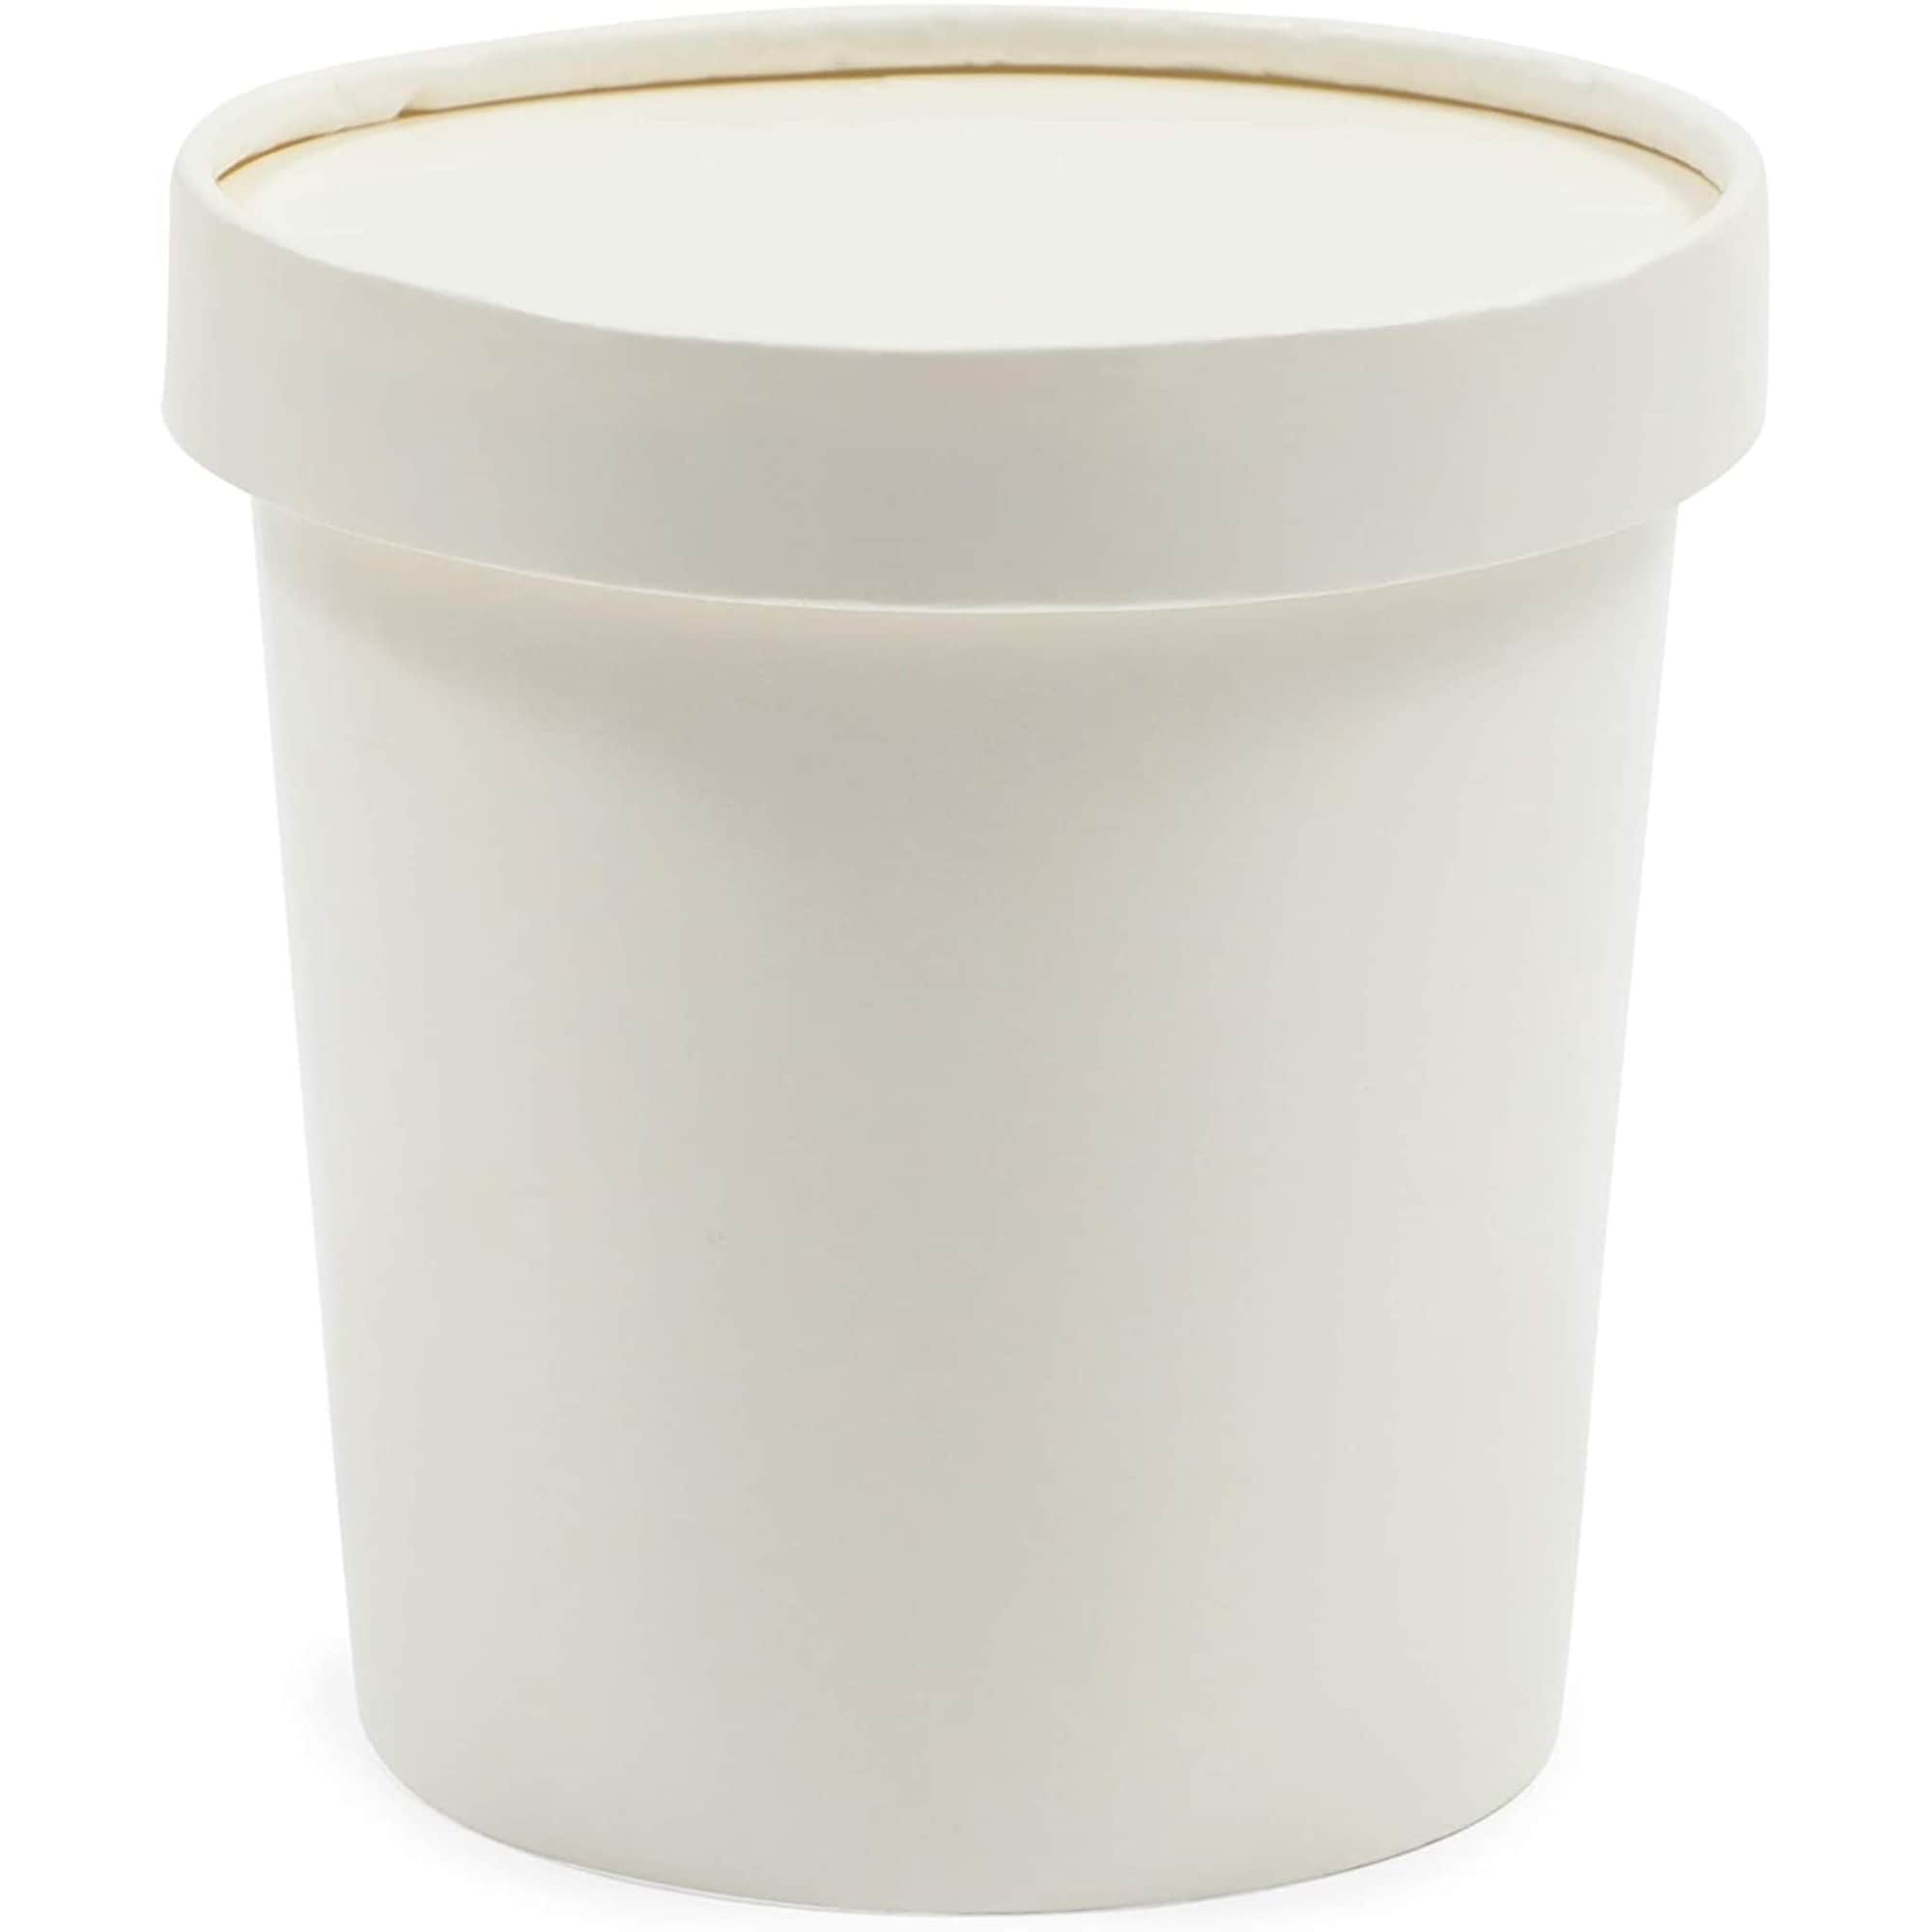 https://ak1.ostkcdn.com/images/products/is/images/direct/194d94741e2981c1cfcd410e7c031f9fc11c0303/White-Disposable-Soup-Containers-with-Lids-for-To-Go-Food-%2816-oz%2C-36-Pack%29.jpg